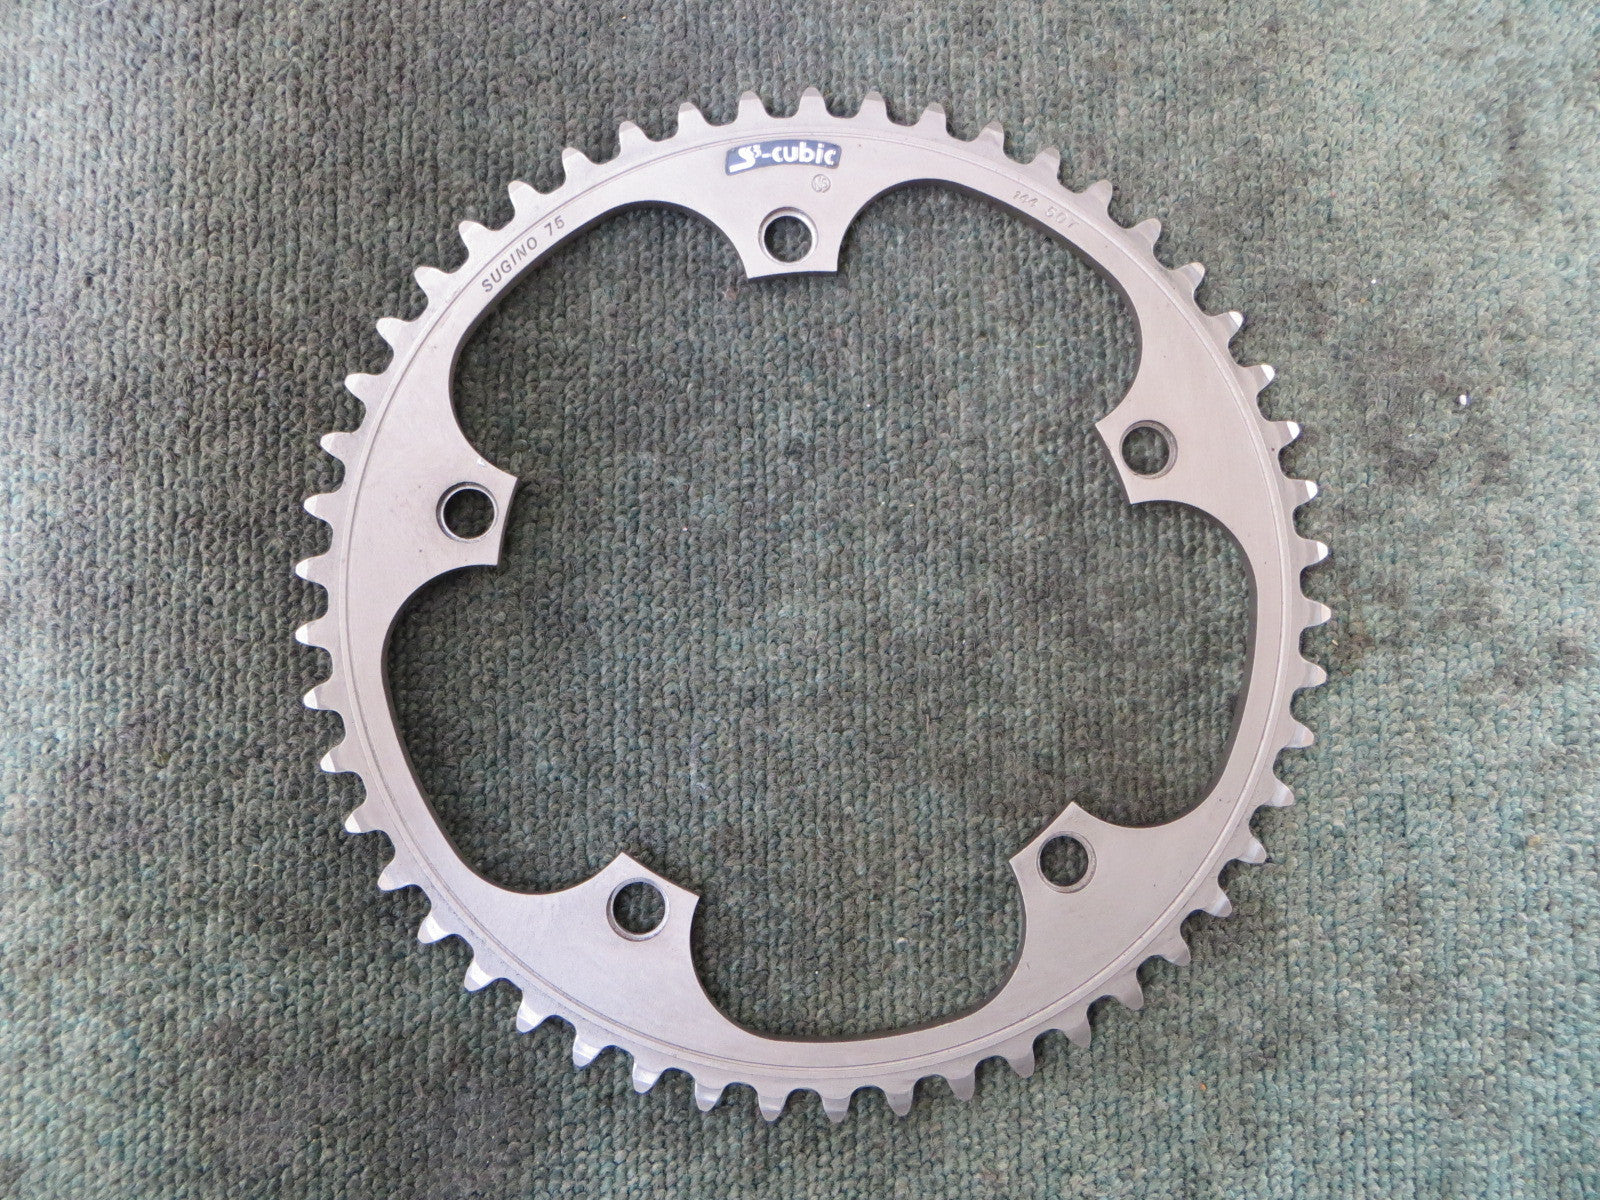 Sugino S-cubic Matte Finish 1/8" 144BCD NJS Chainring 50T (17031805)